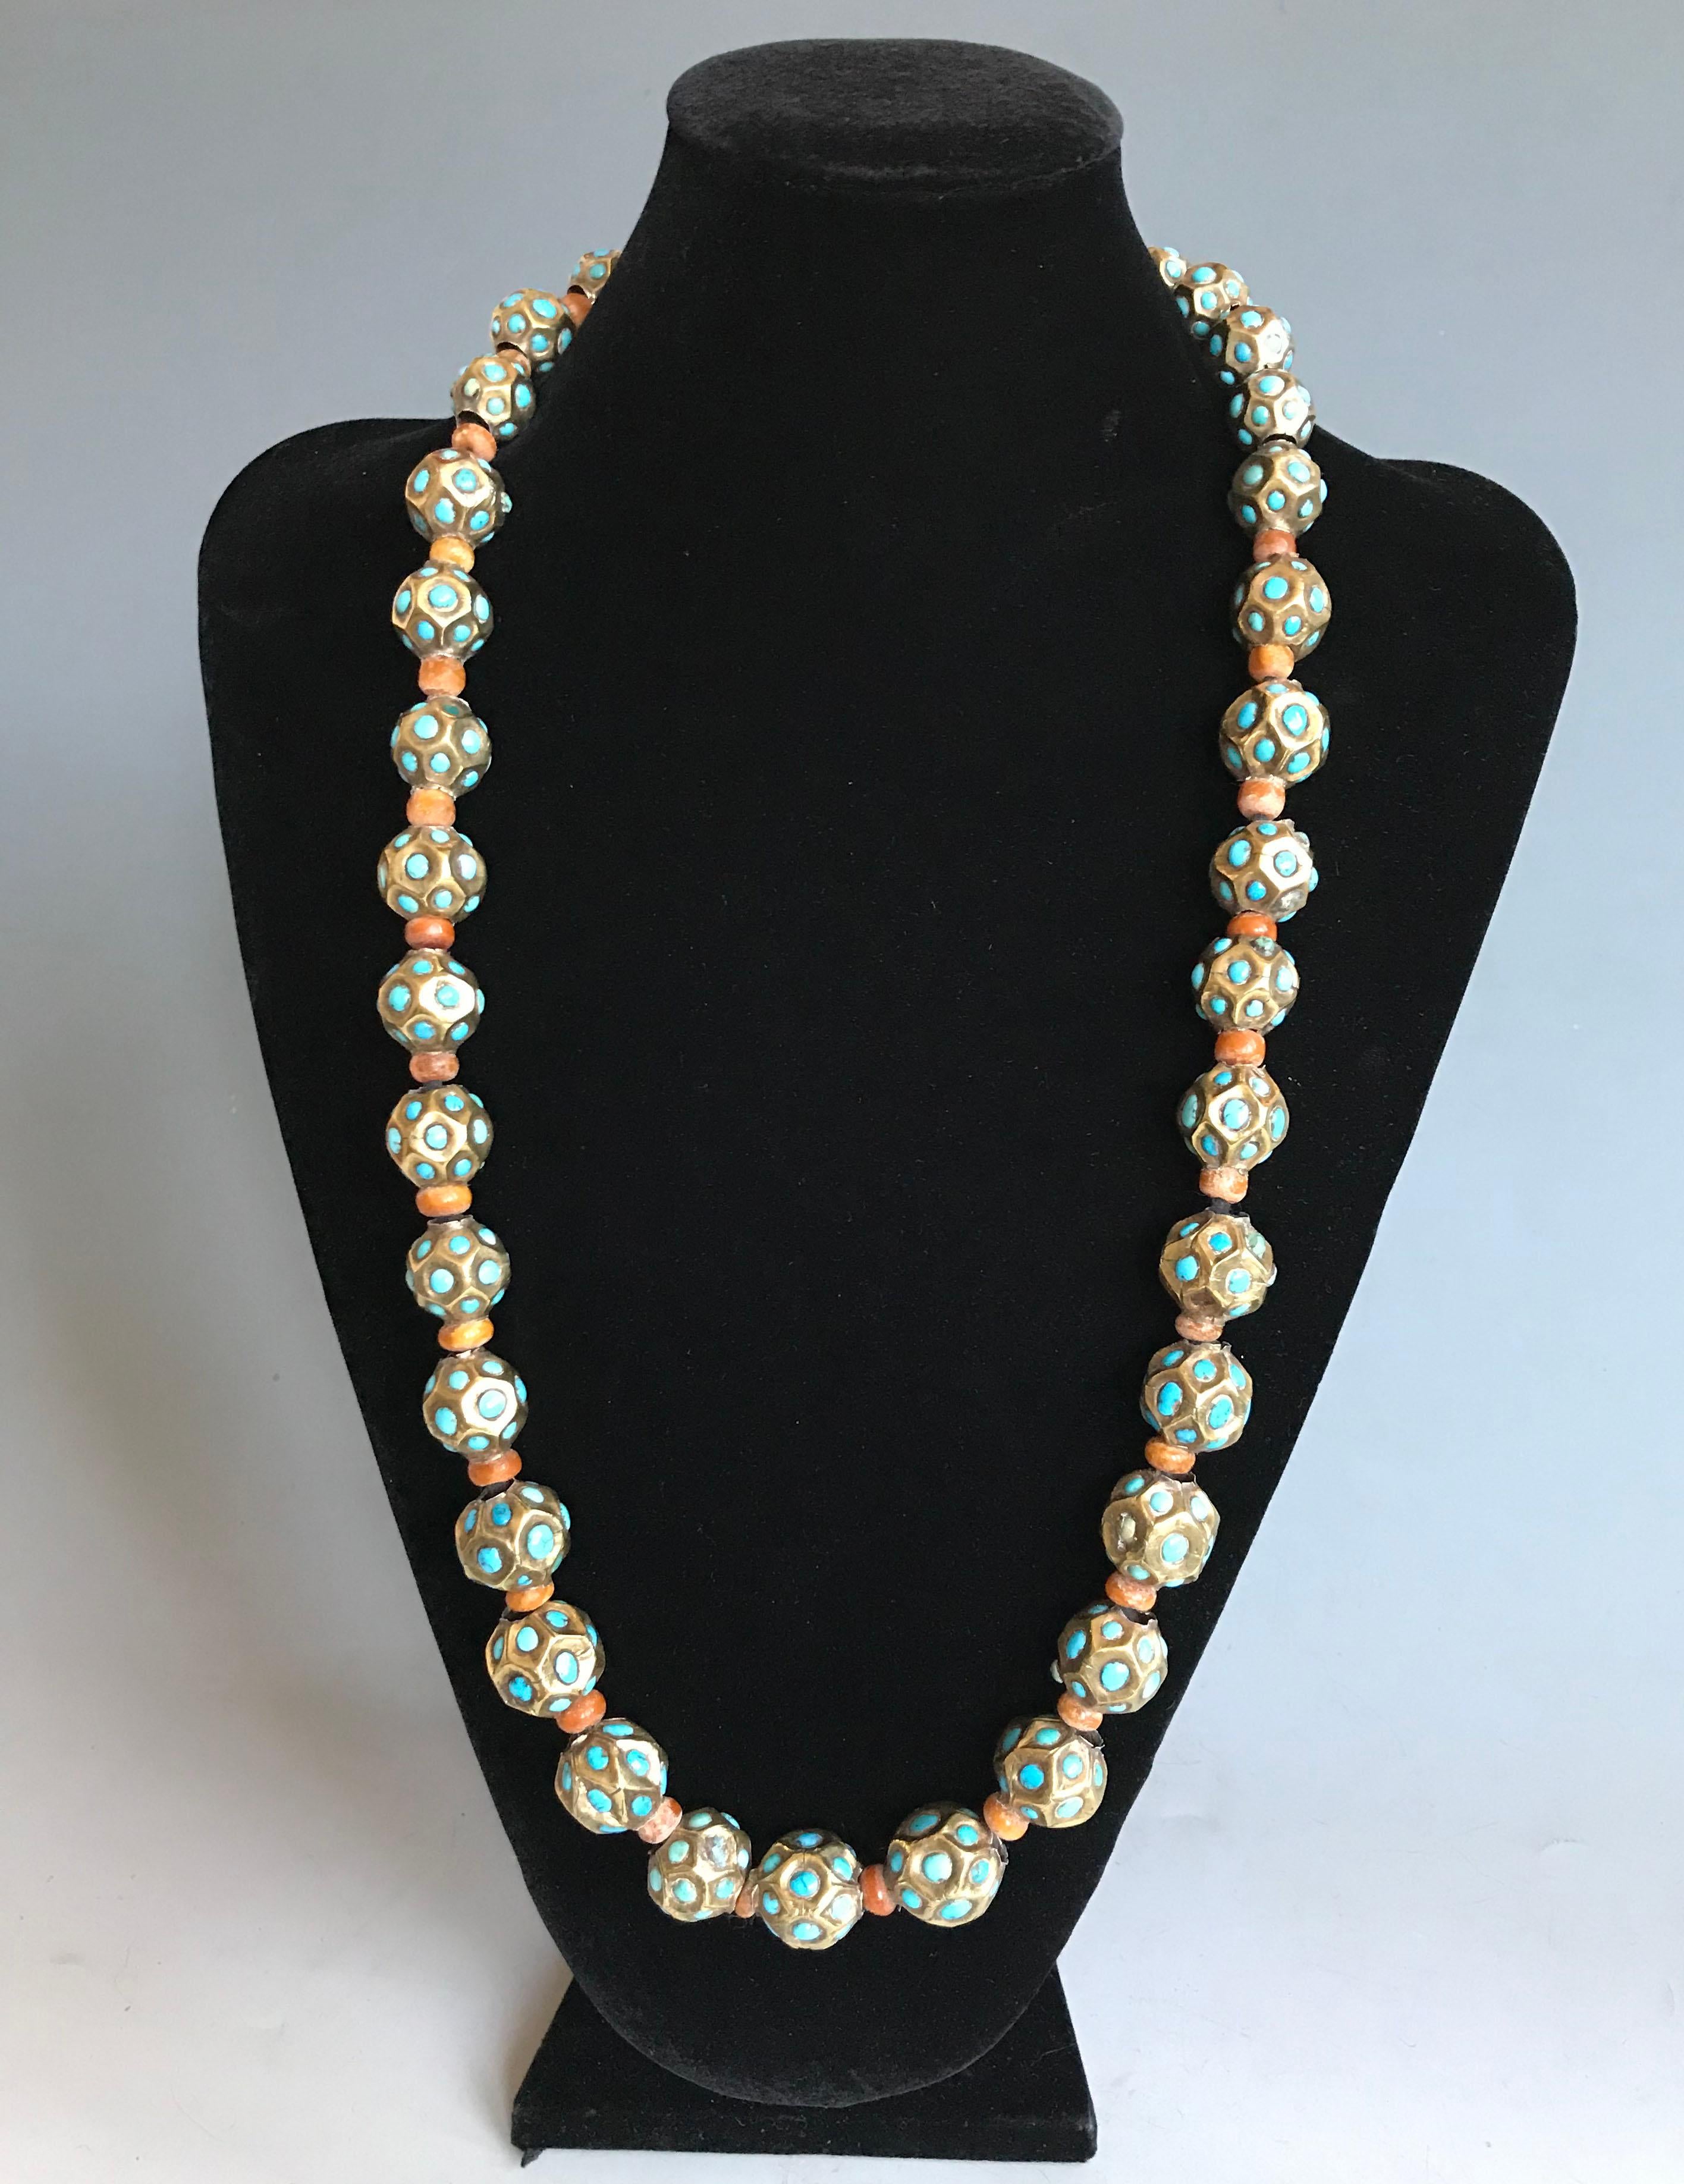 A wonderful very rare Central Asian necklace of multi faceted silver and gold gilt beads with small turquoise pieces in each faceted section, beautiful antique beads dating from 17/18 Century AD and earlier. The necklace is slightly graduated with